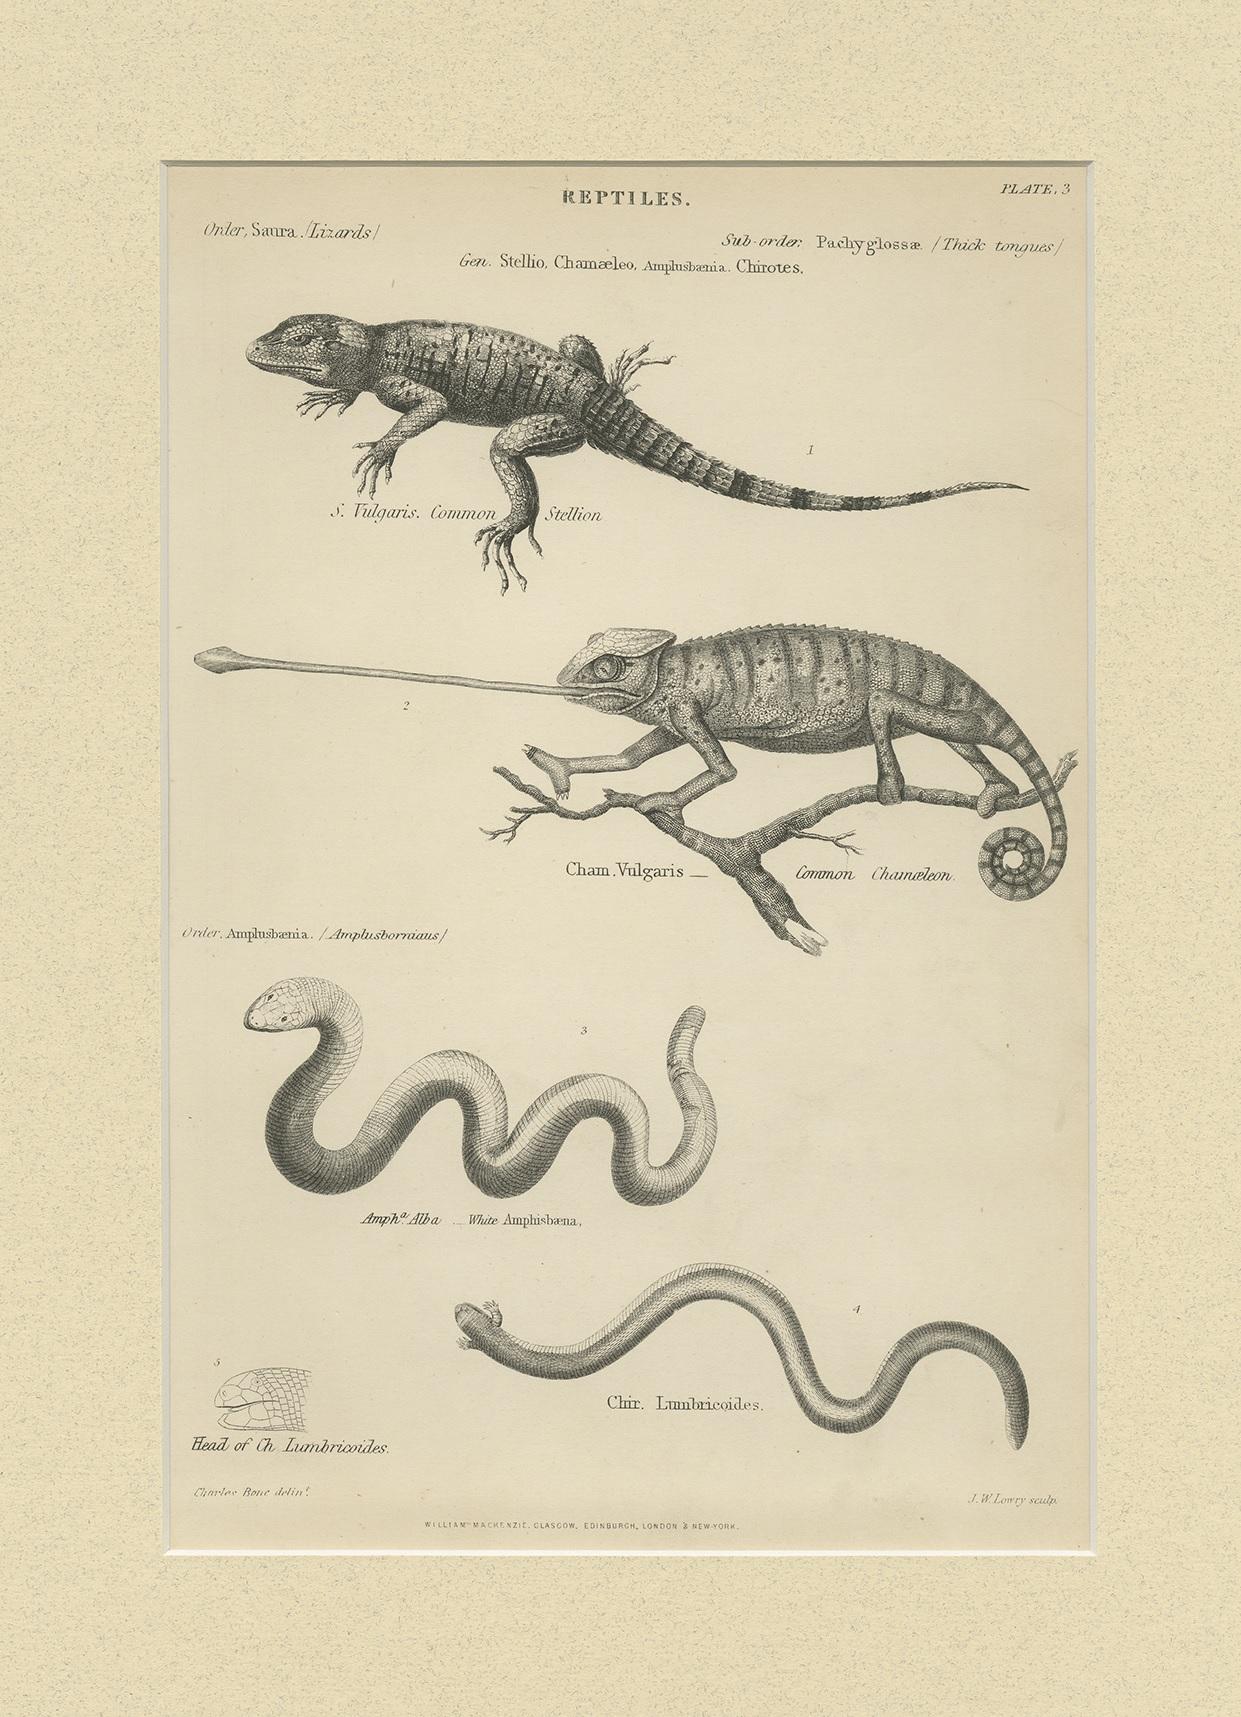 well labelled diagram of a lizard